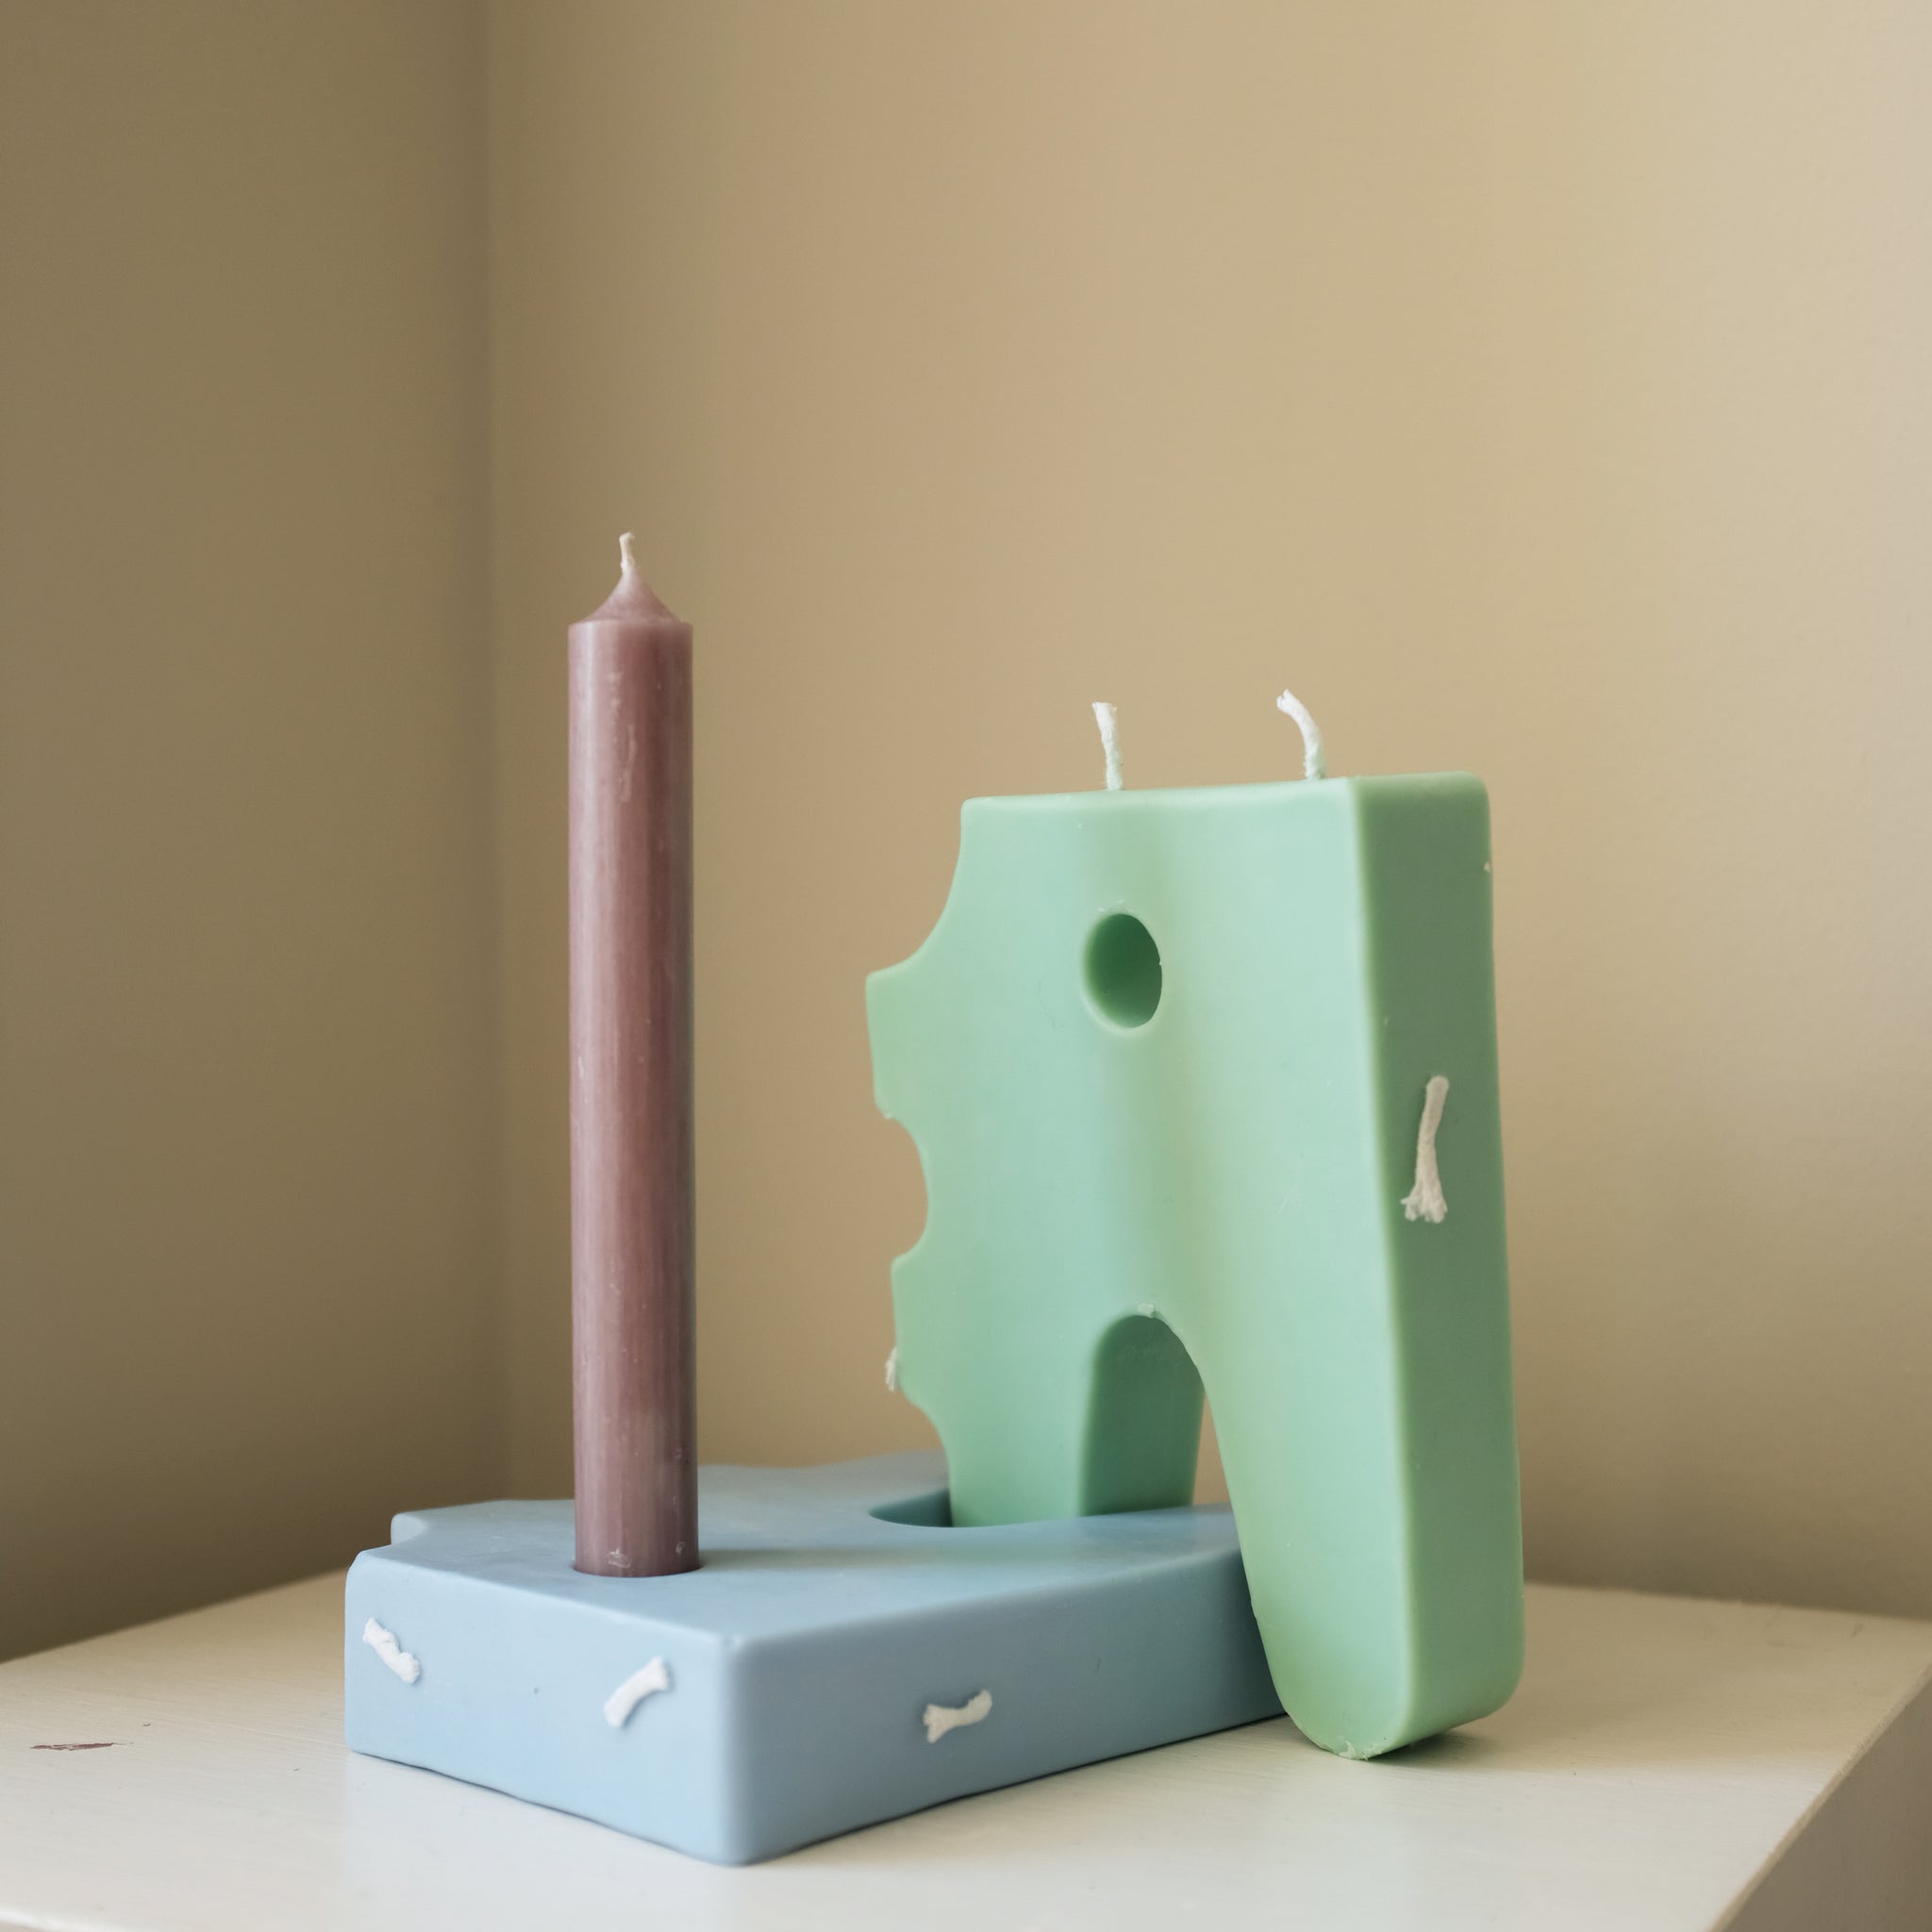 CANDLES COLLAB WITH PAMPA STUDIO BY THE MINIMONO PROJECT - BRAND FOR ECO FRIENDLY - PLAYFUL - MULTI FUNCTIONAL - SUSTAINABLE - HIGH QUALITY - DESIGN FURNITURE FROM RECYCLED PLASTIC FOR BOTH ADULT AND CHILDREN MADE IN BERLIN GERMANY